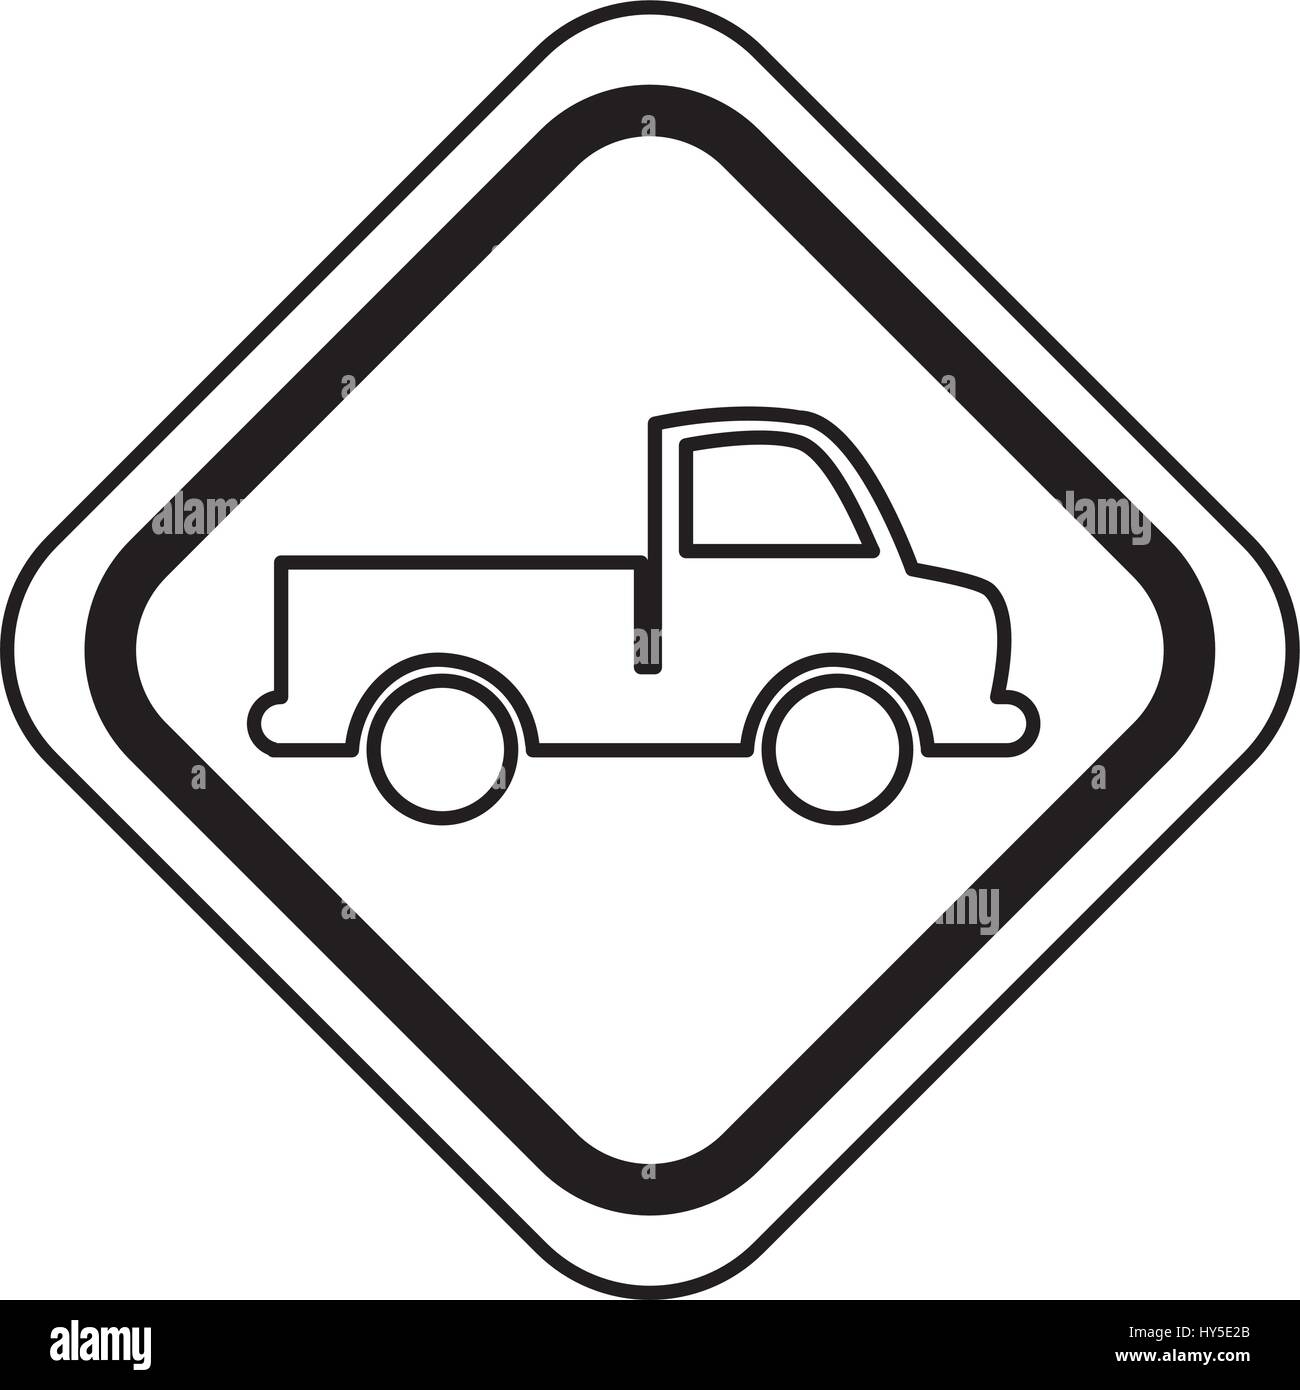 traffic signal with truck vehicle isolated icon vector illustration design Stock Vector